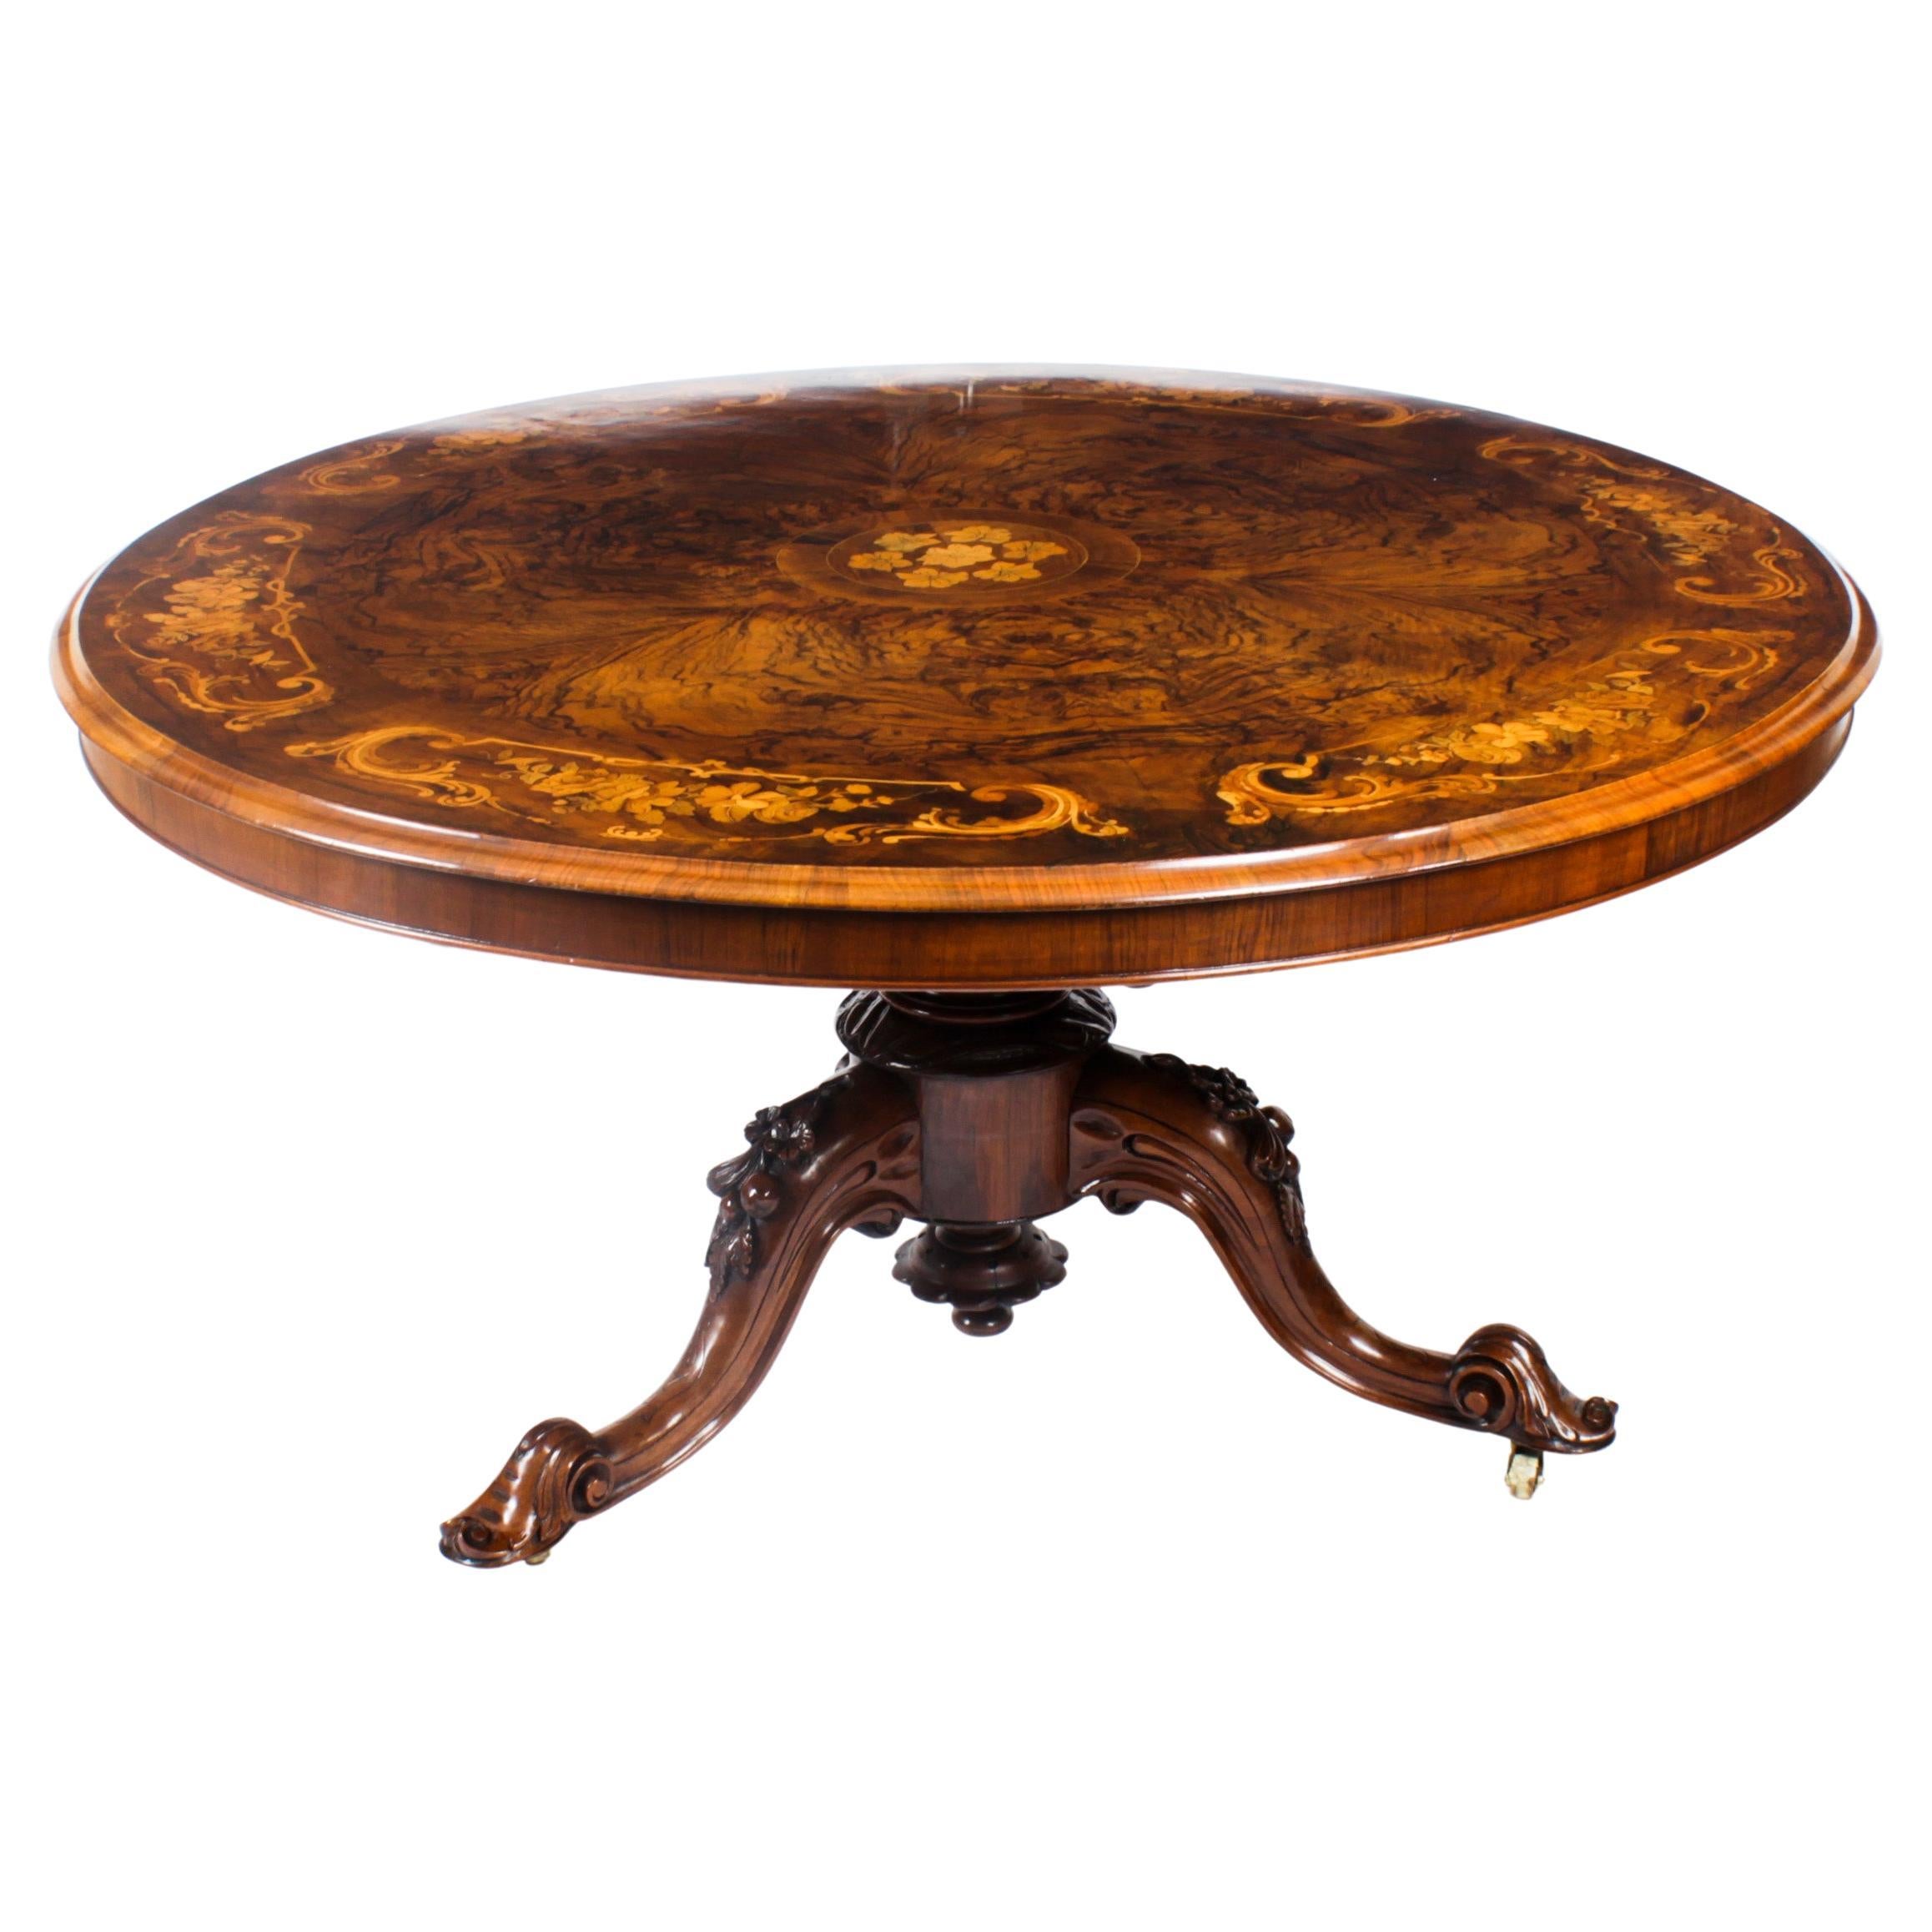 Antique Victorian Burr Walnut Marquetry Centre Loo Table 19th C